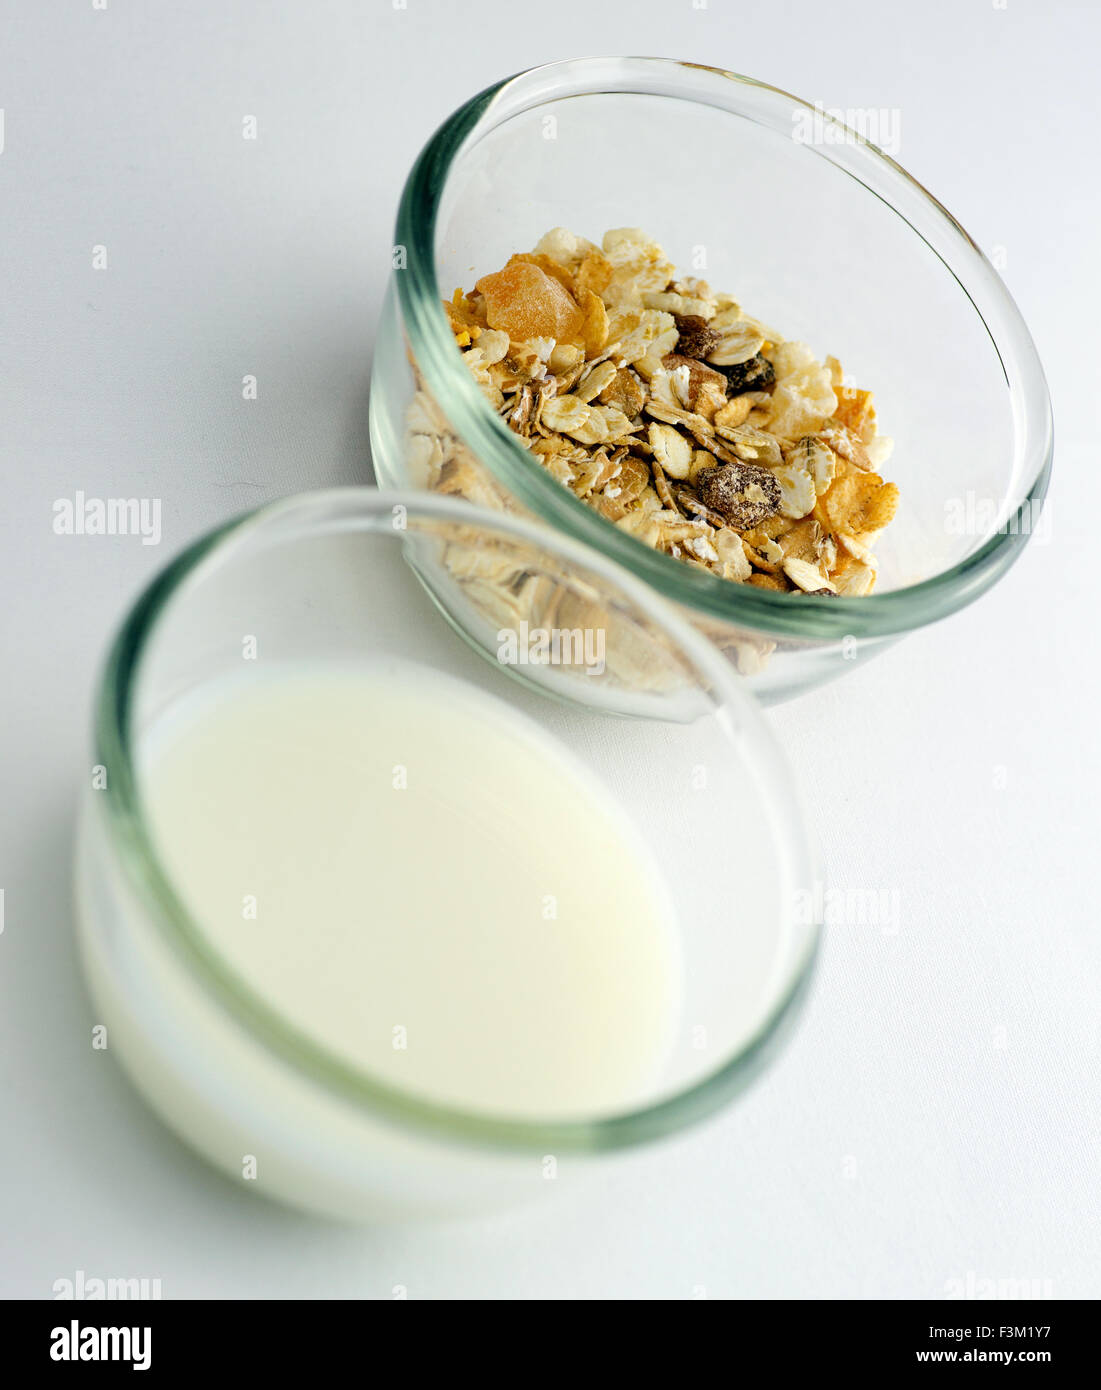 Low fat milk with muesli and granola in transparent bowls against a white background Stock Photo